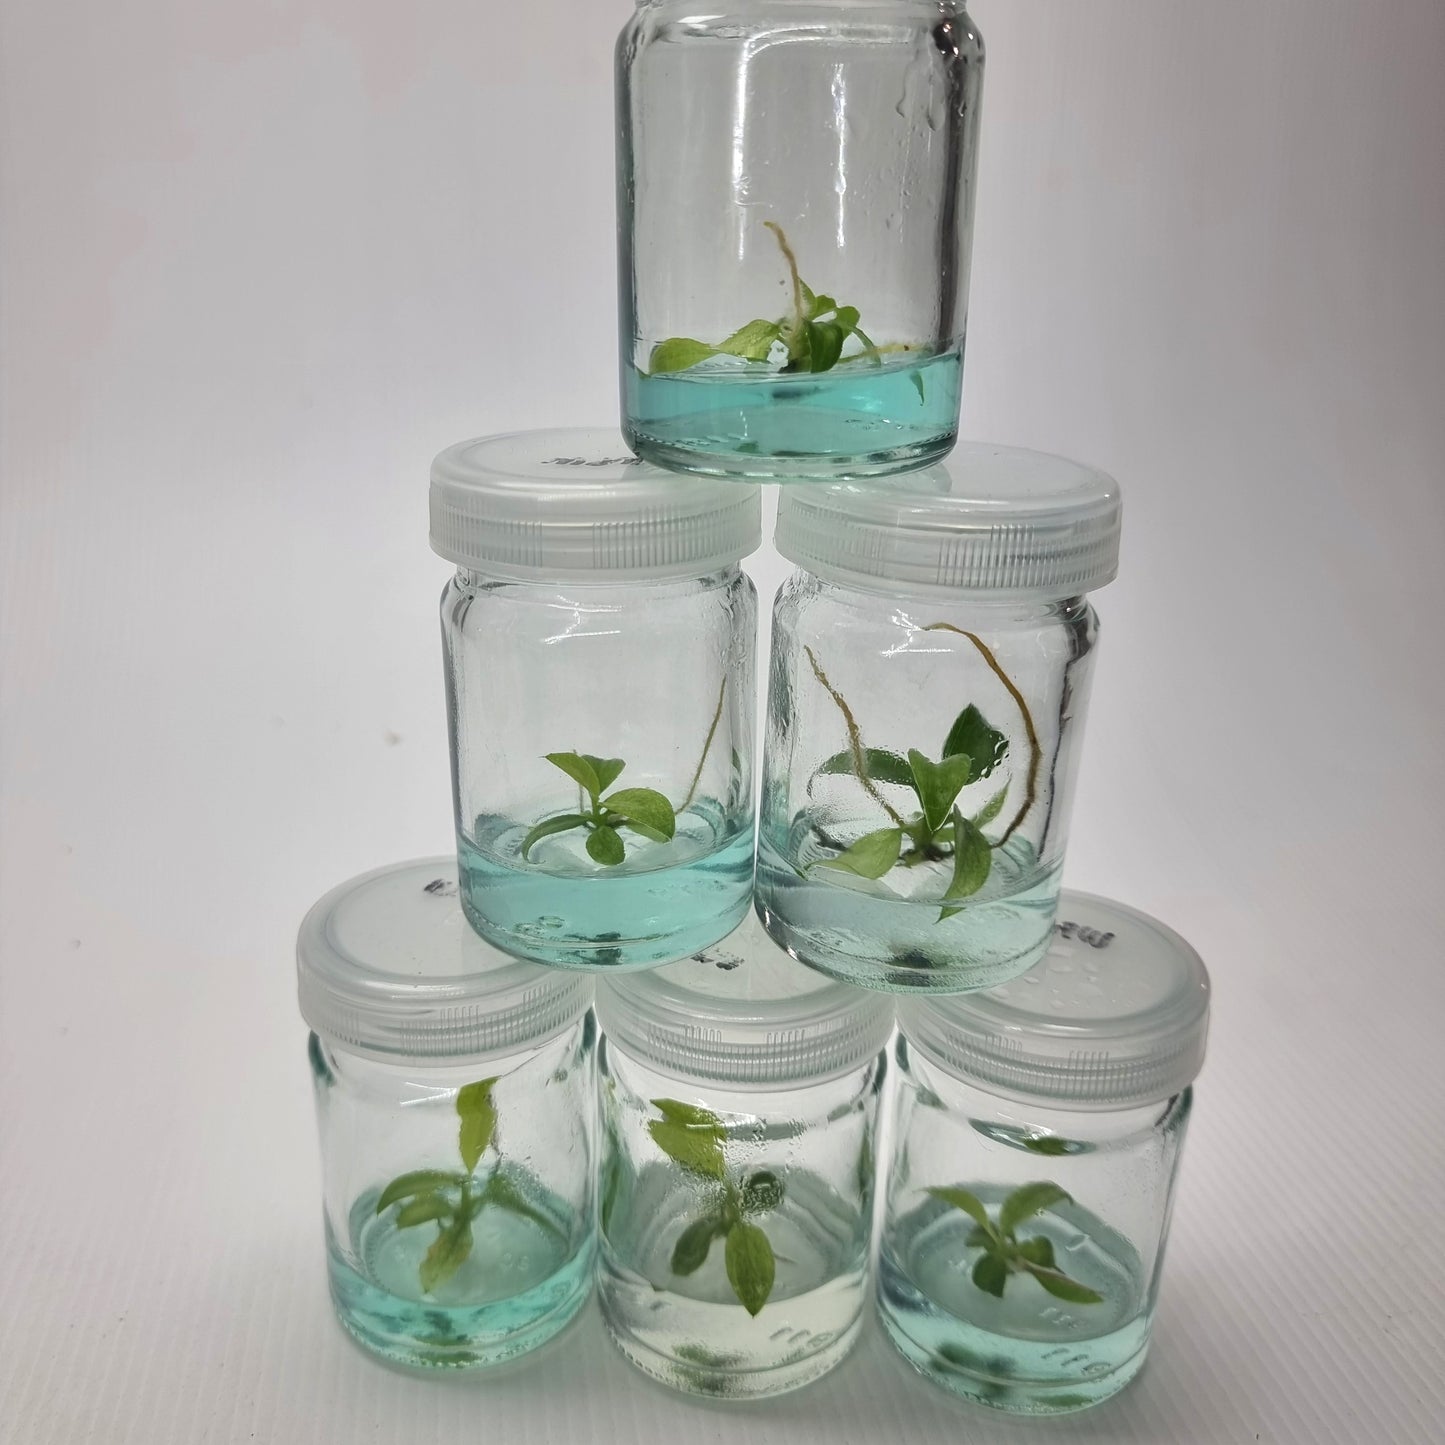 Philodendron Whipple Way - Tissue culture kit for sale in Perth Australia